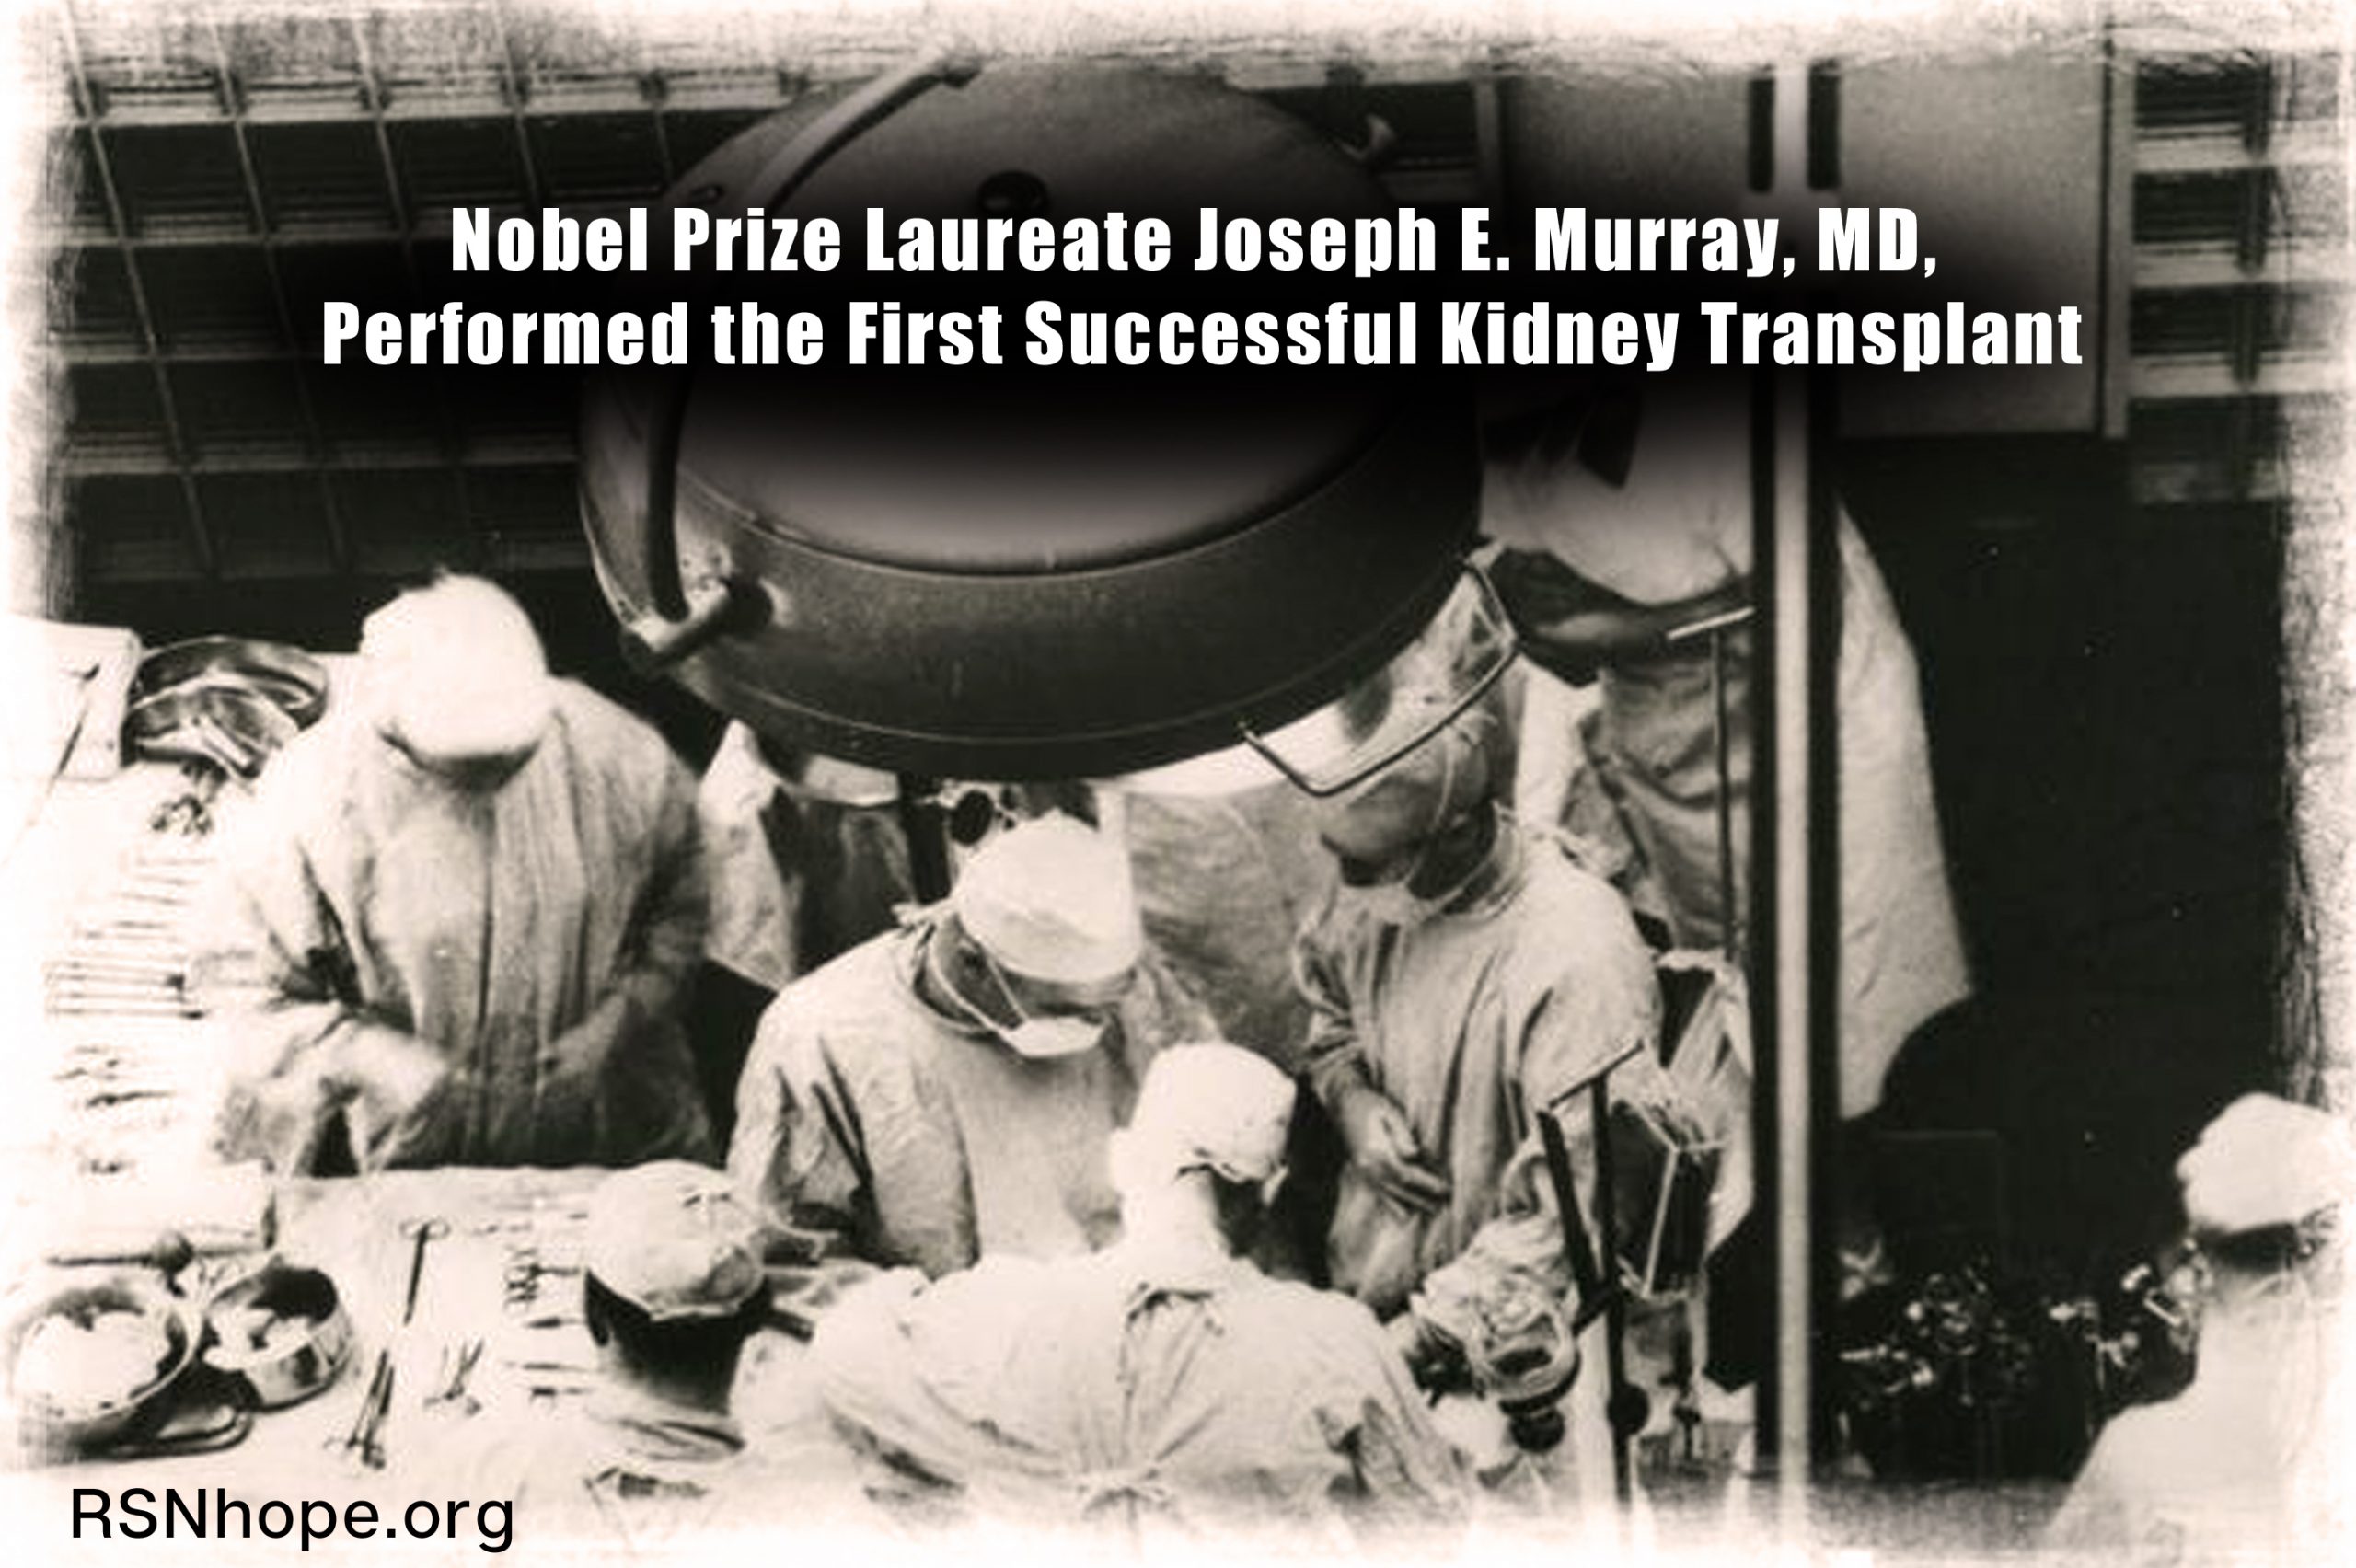 Did You Know? Nobel Prize Laureate Joseph E. Murray, MD ...